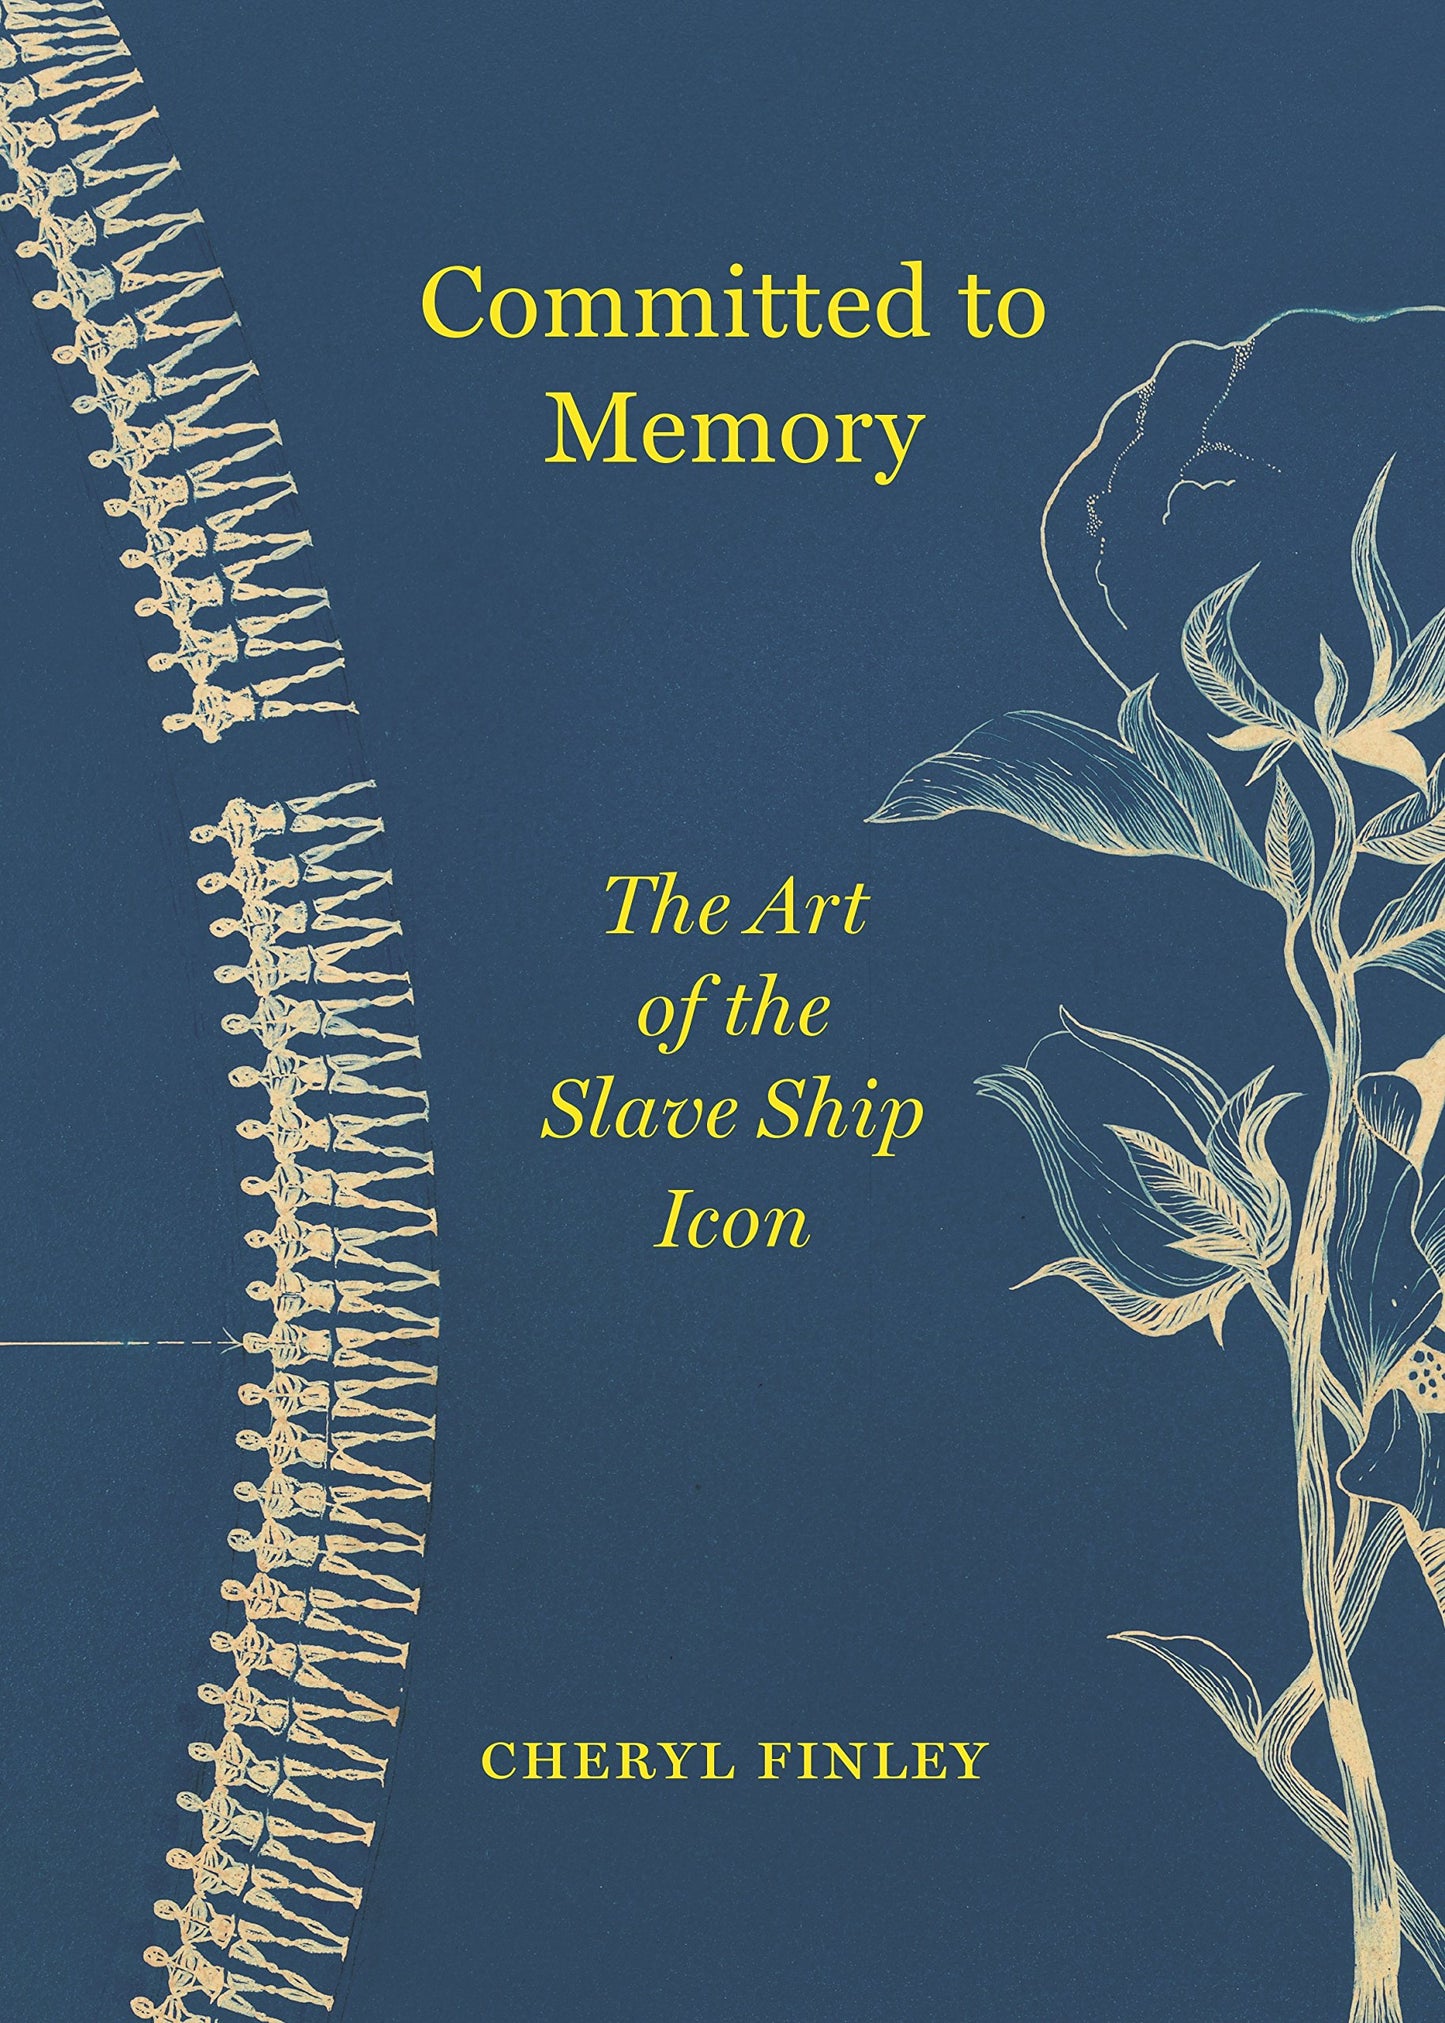 Committed to Memory // The Art of the Slave Ship Icon